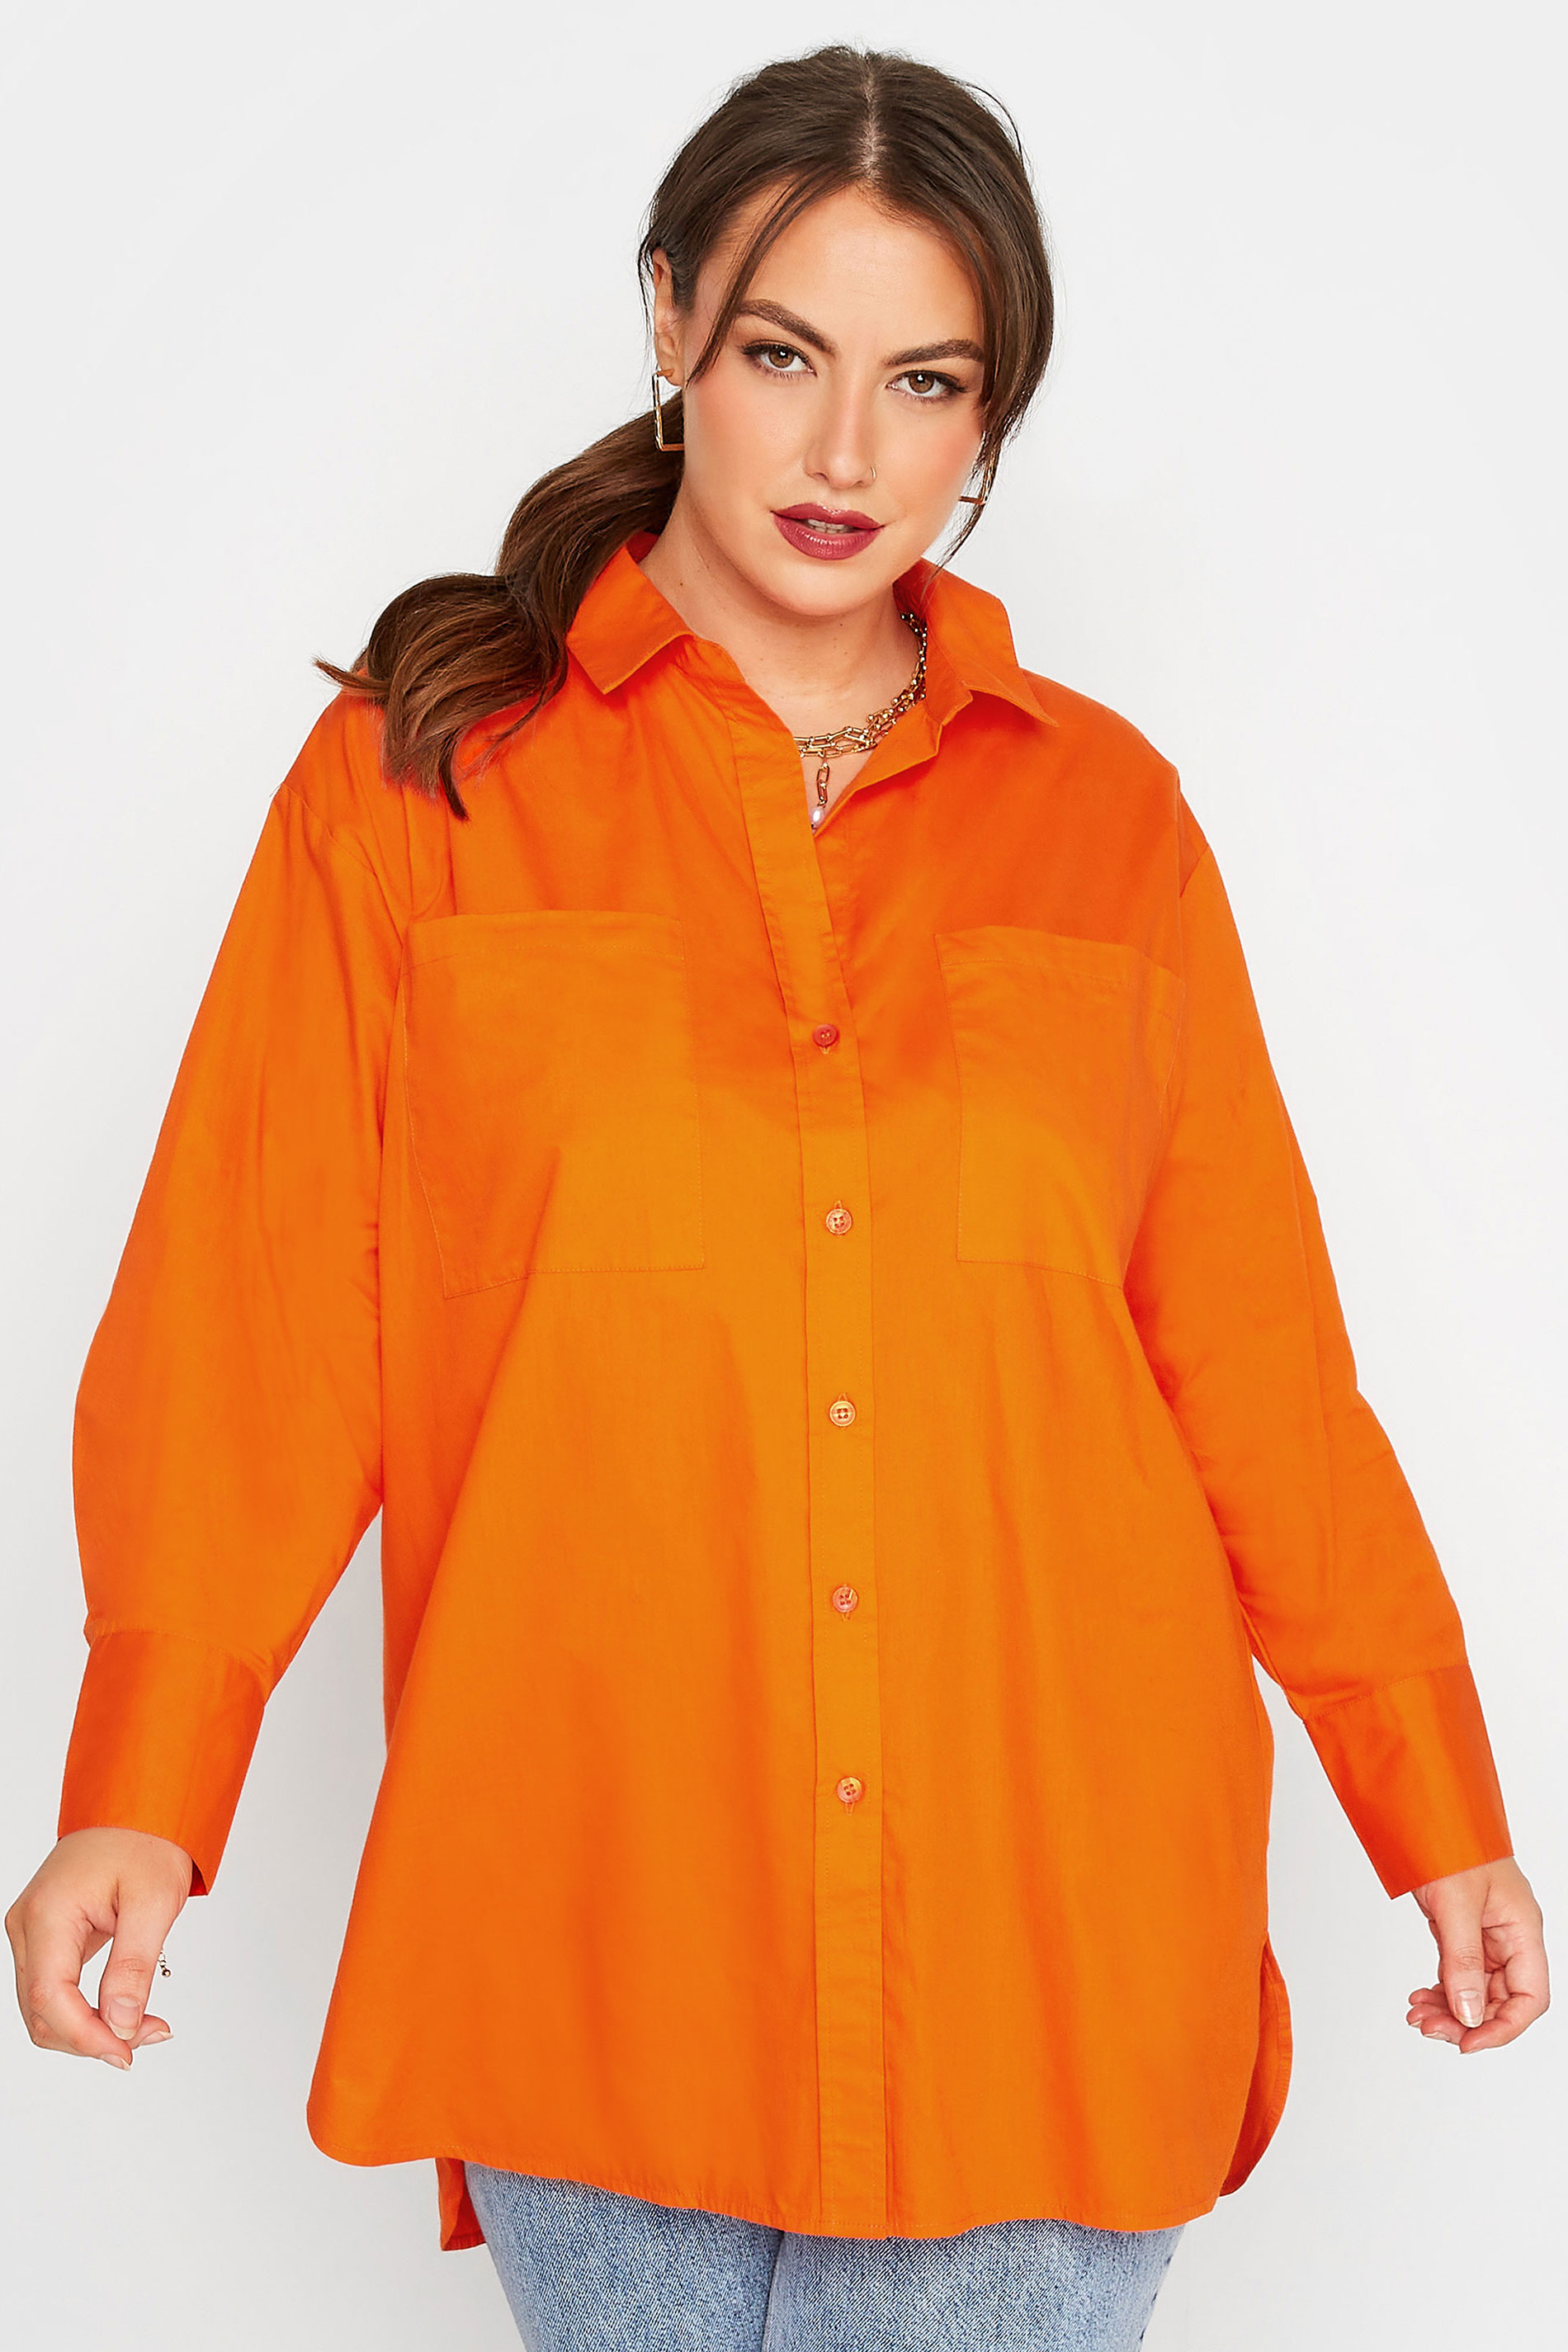 Grande taille  Blouses & Chemisiers Grande taille  Chemisiers | LIMITED COLLECTION - Chemisier Orange Oversize Boyfriend - TH92888